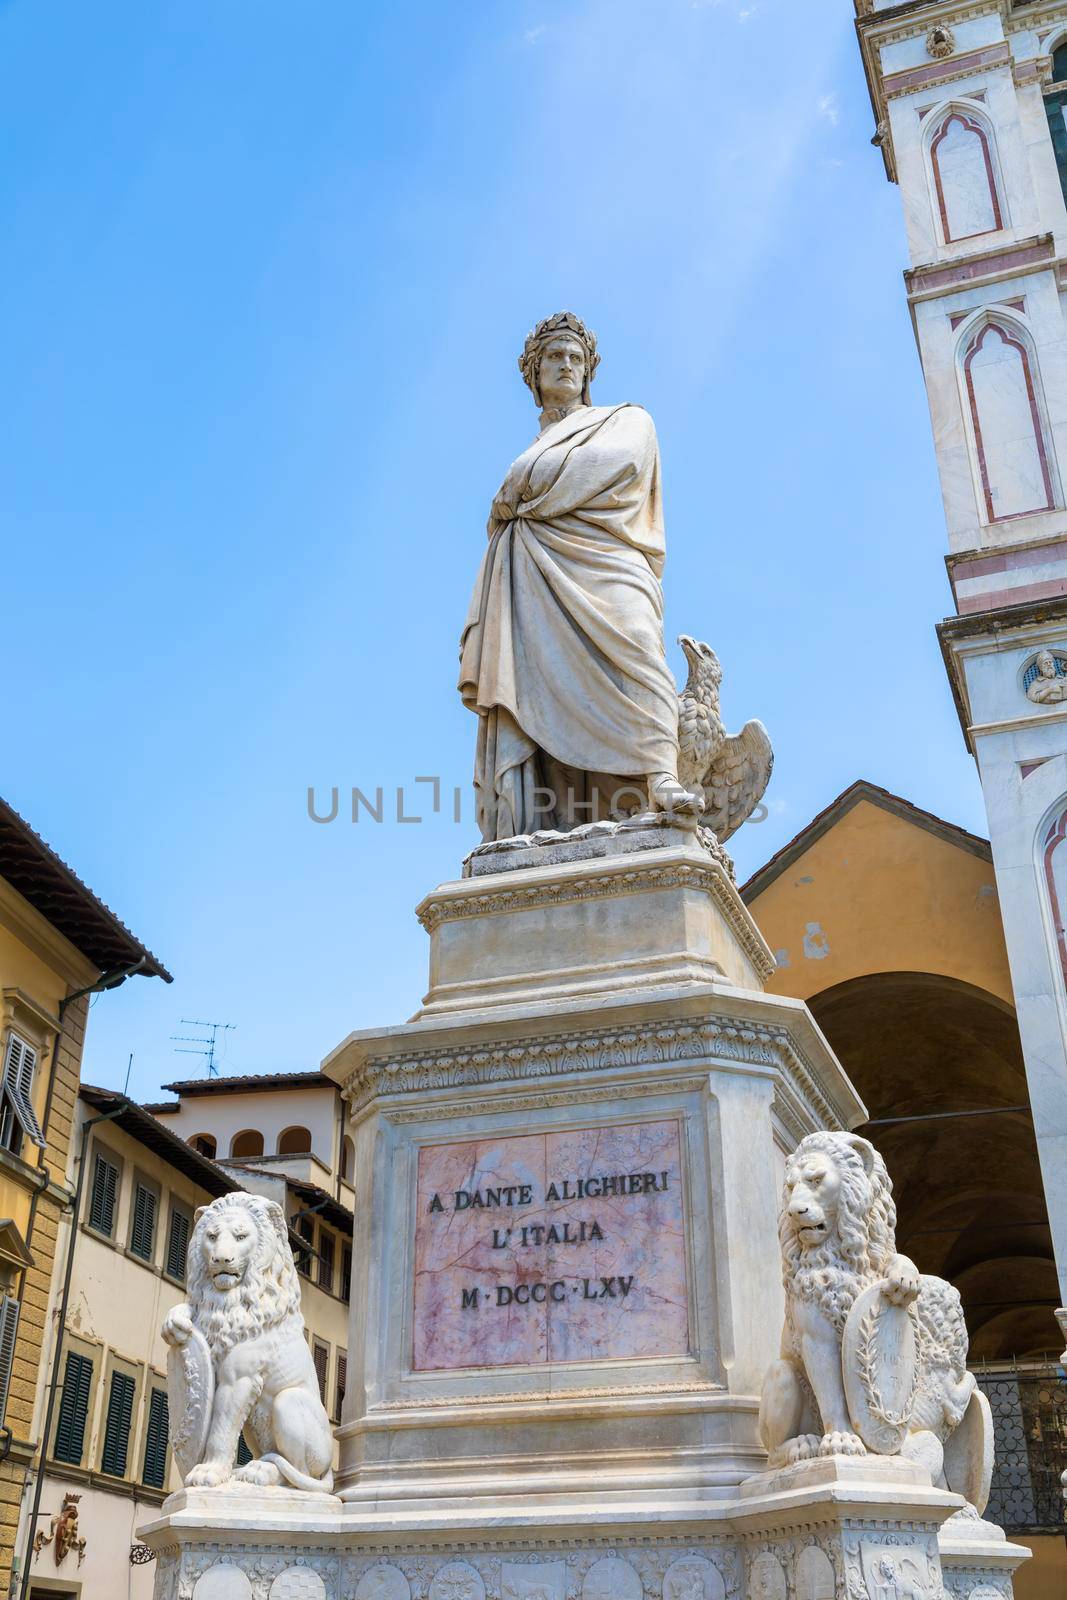 Dante Alighieri statue in Florence, Tuscany region, Italy, with amazing blue sky background. by Perseomedusa